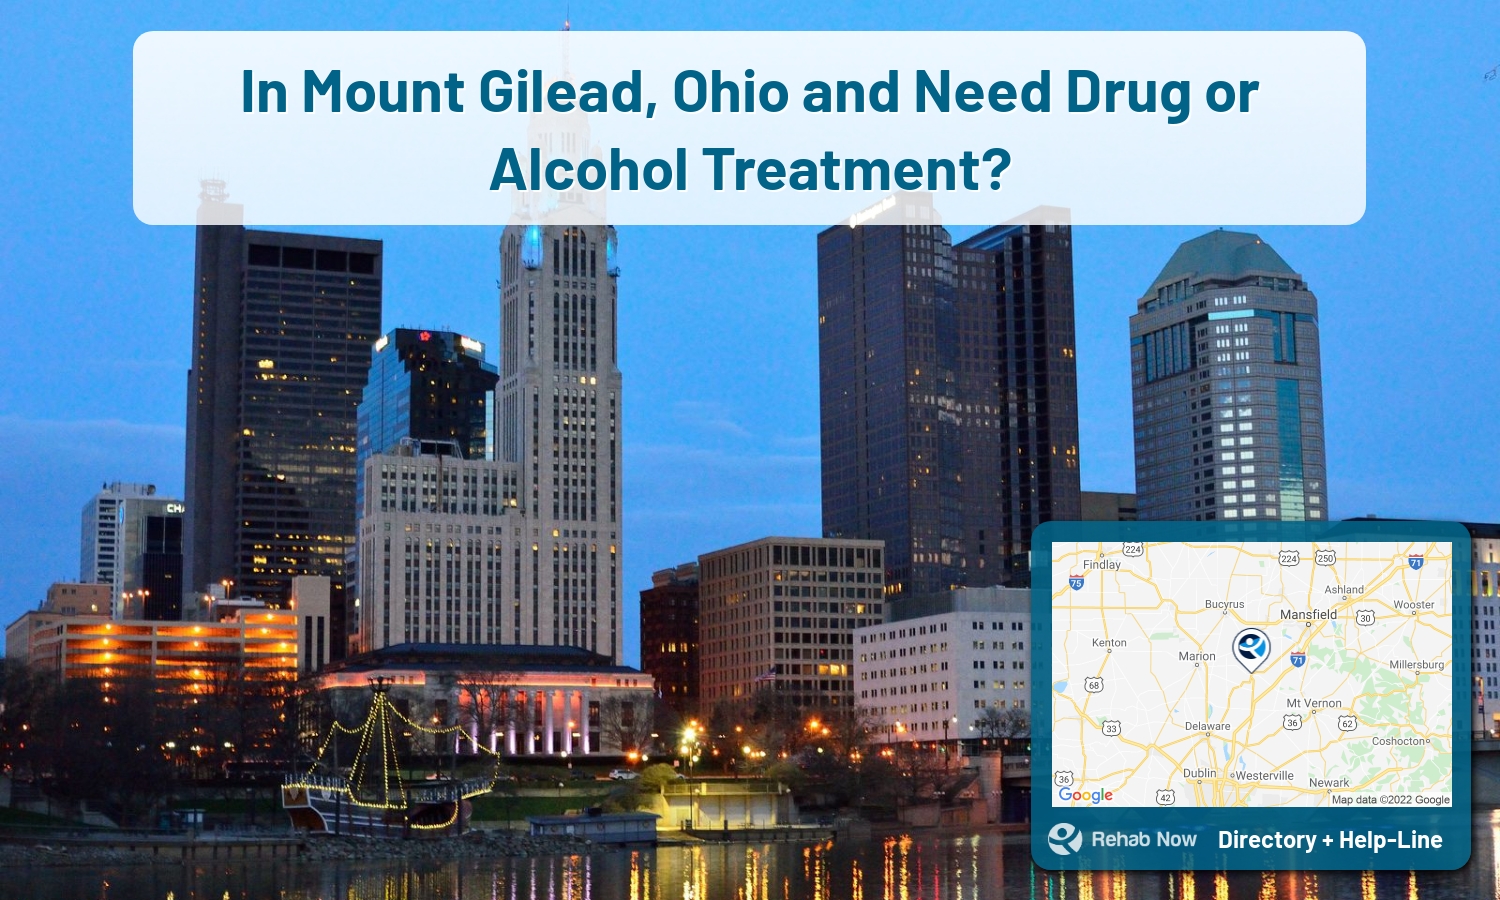 Drug rehab and alcohol treatment services nearby Mount Gilead, OH. Need help choosing a treatment program? Call our free hotline!